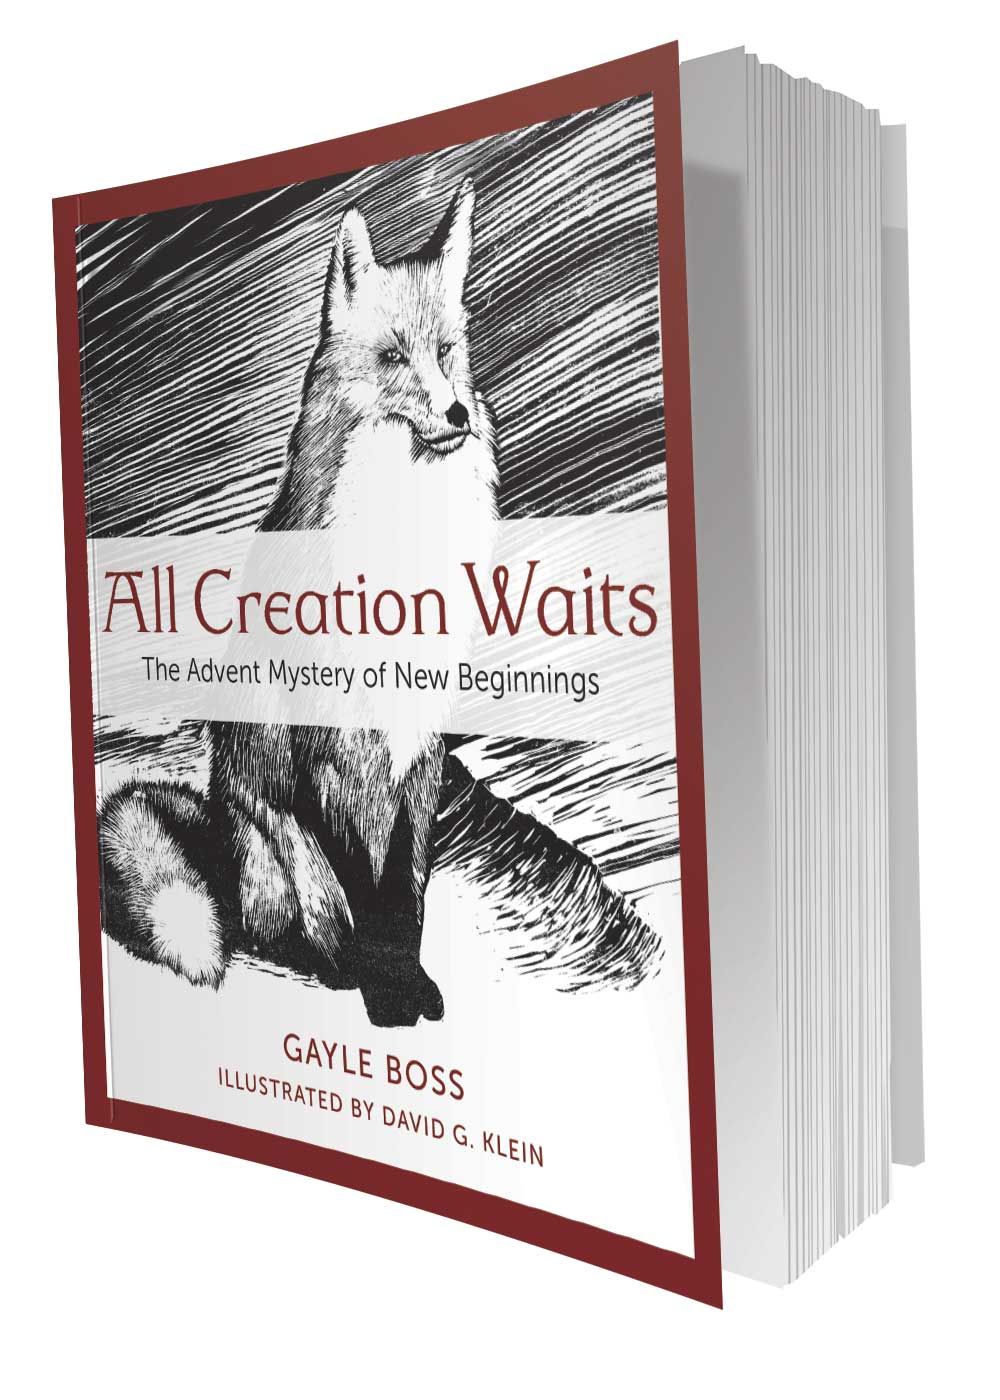 The book All Creation Waits: The Advent Mystery of New Beginnings by Gayle Boss. 